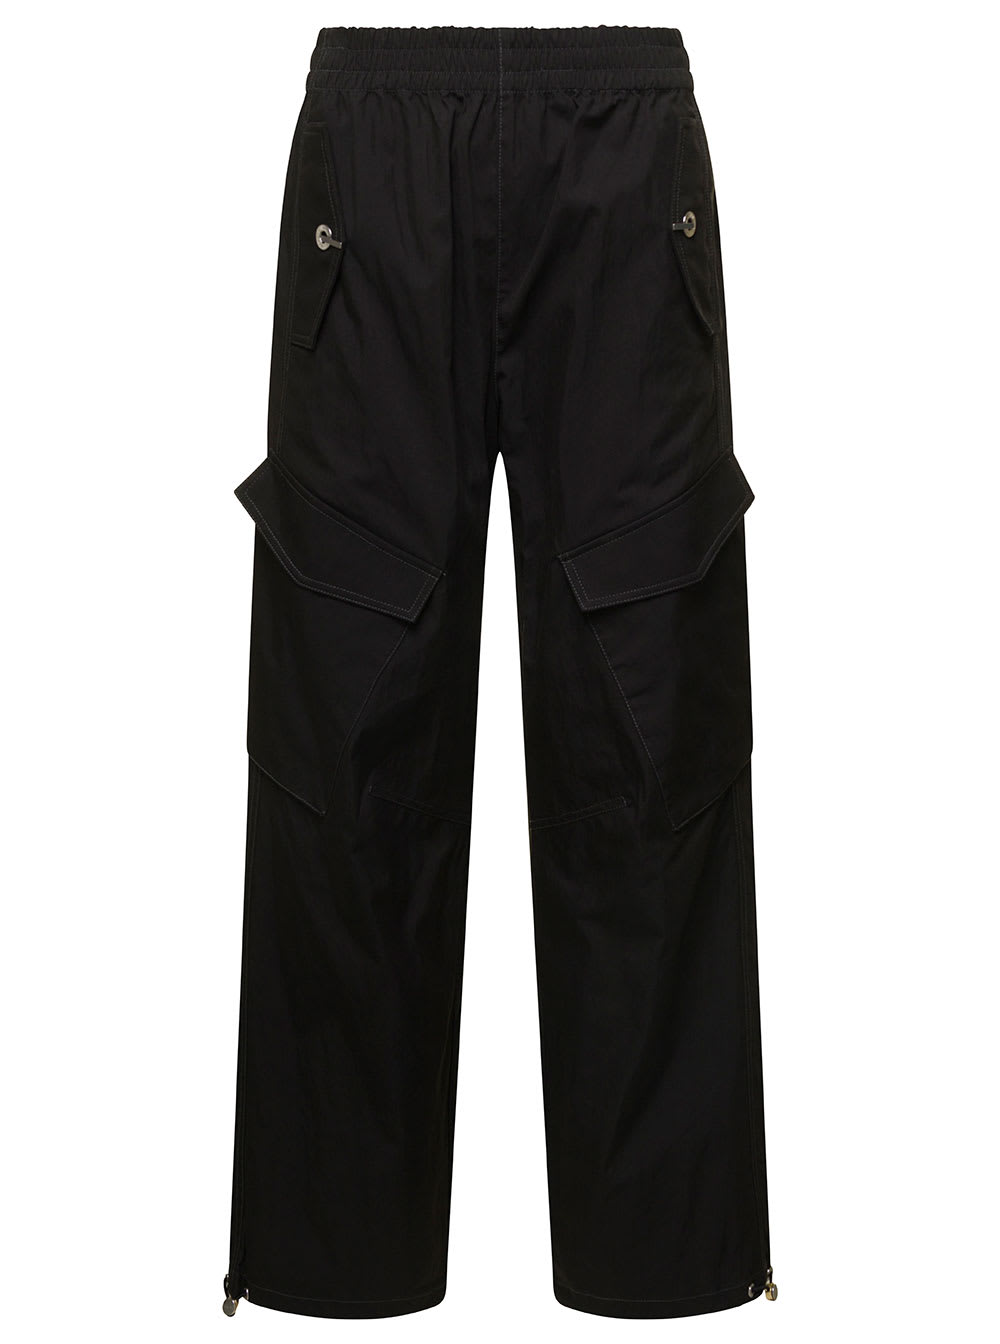 Dion Lee Latch Cargo Pants